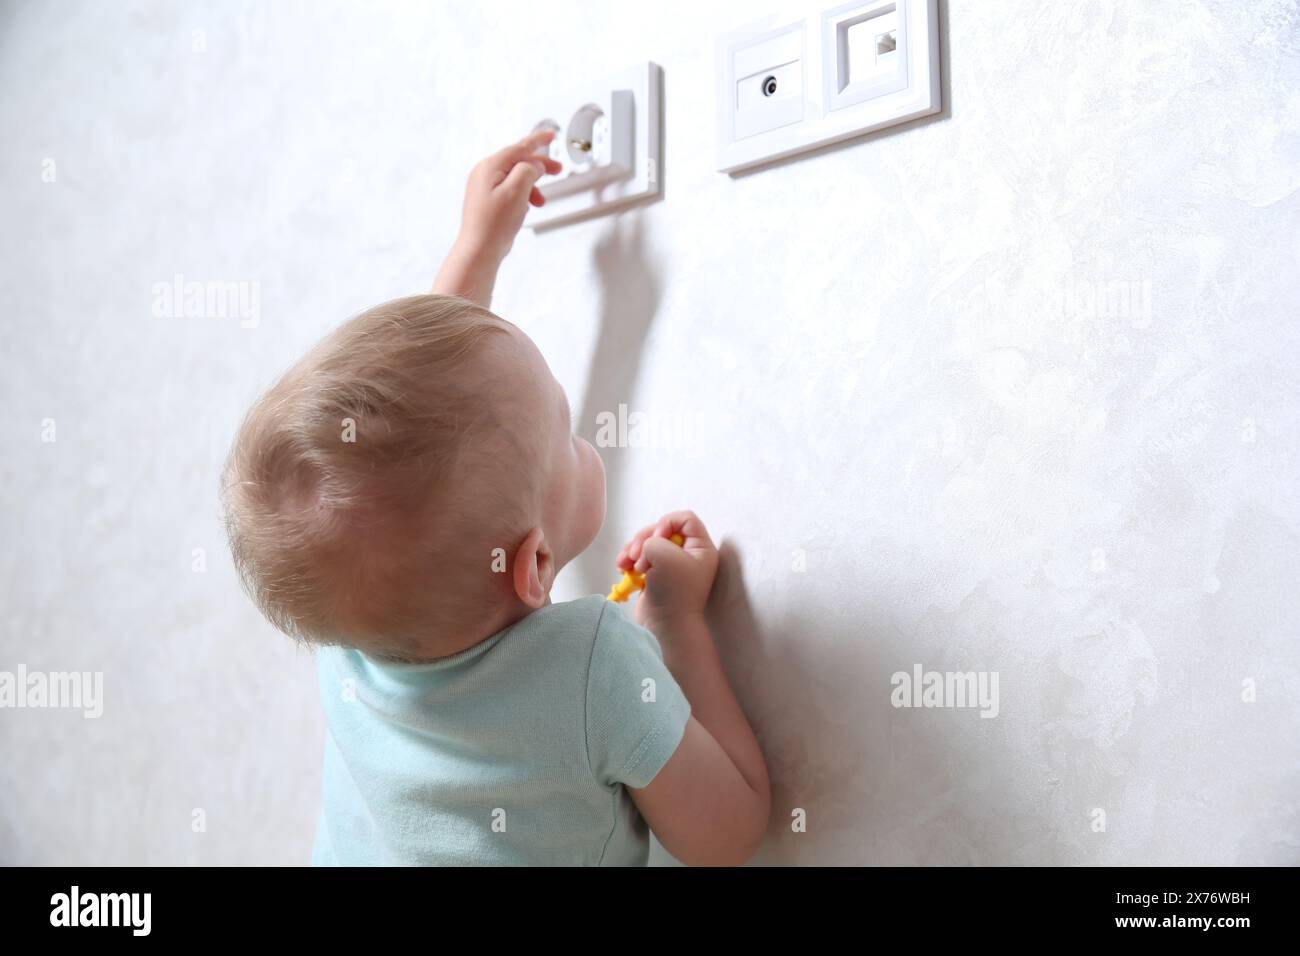 Little child playing with electrical socket indoors. Dangerous situation Stock Photo